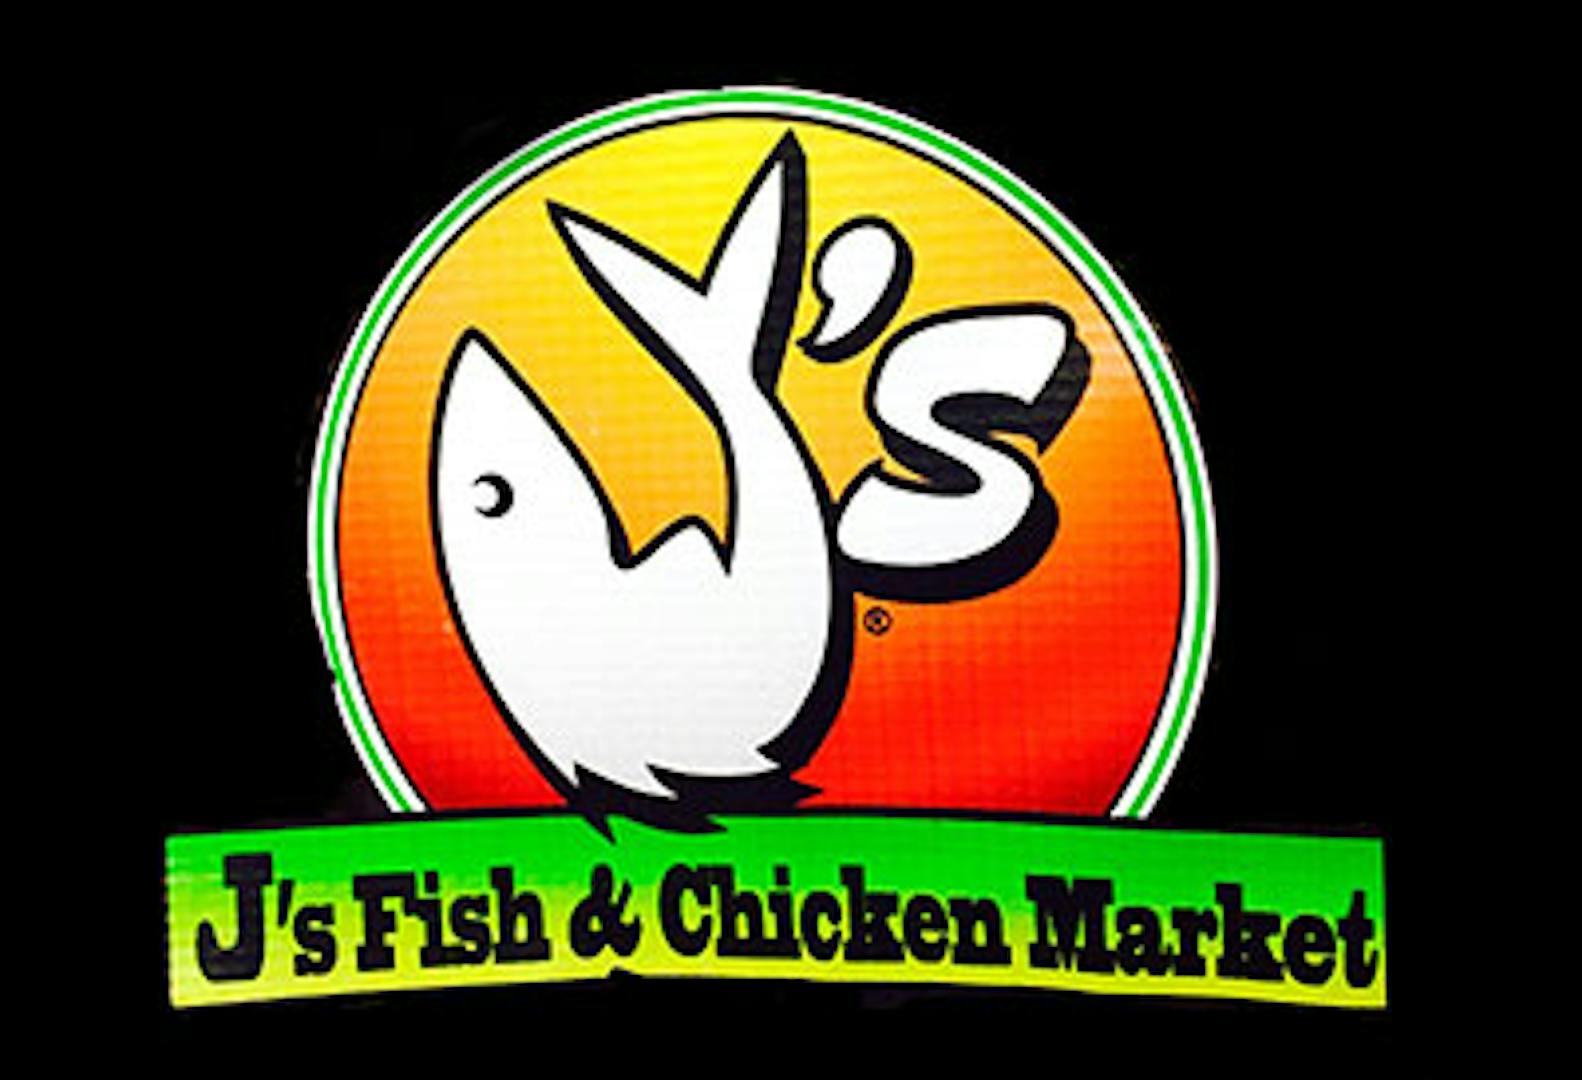 J's Fish and Chicken